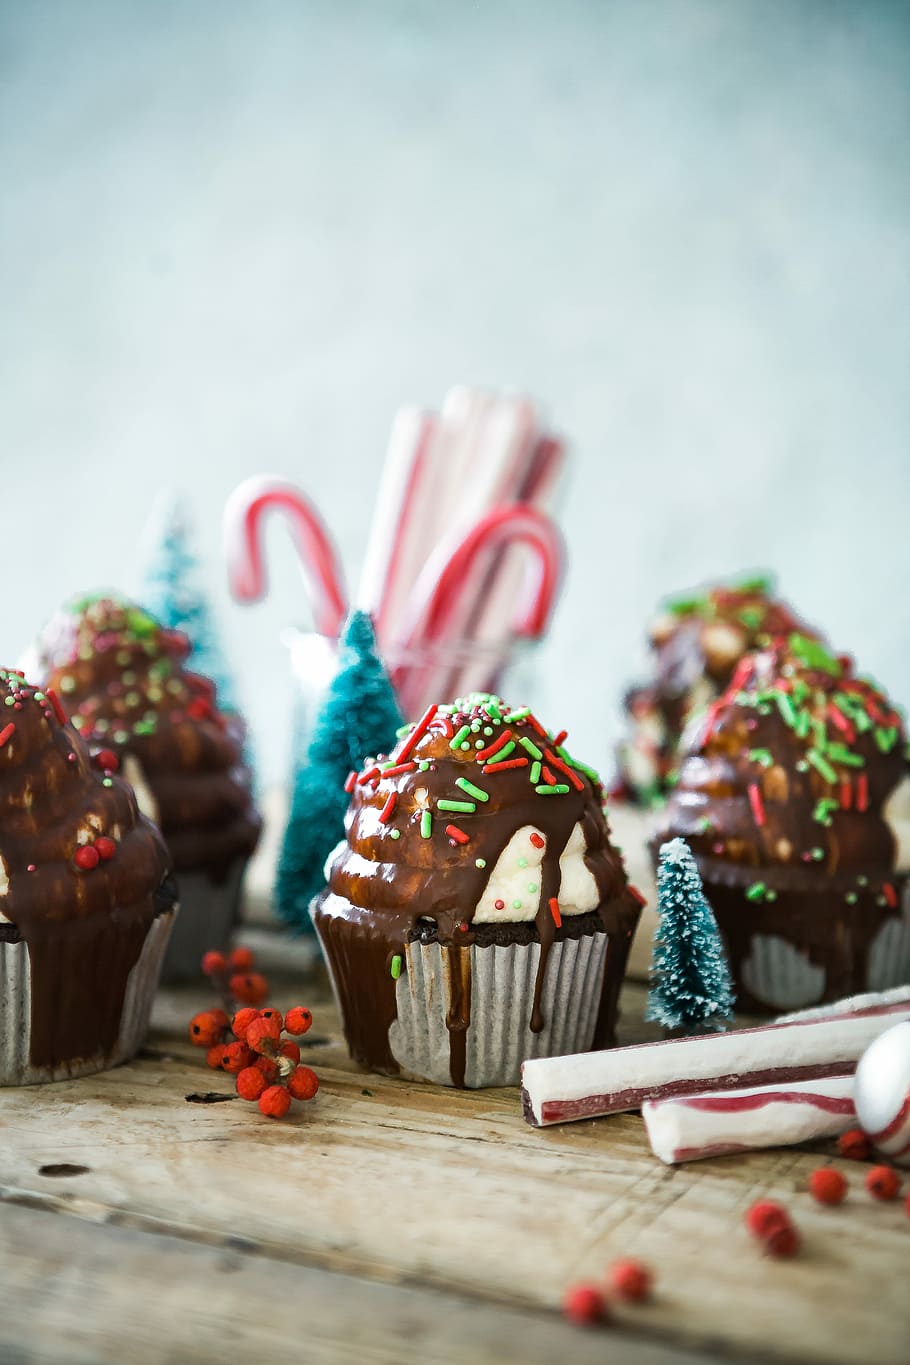 HD wallpaper: cupcakes with sprinkles on table, chocolate cupcake with  chocolate syrup and red and green sprinkles in tilt shift photography |  Wallpaper Flare